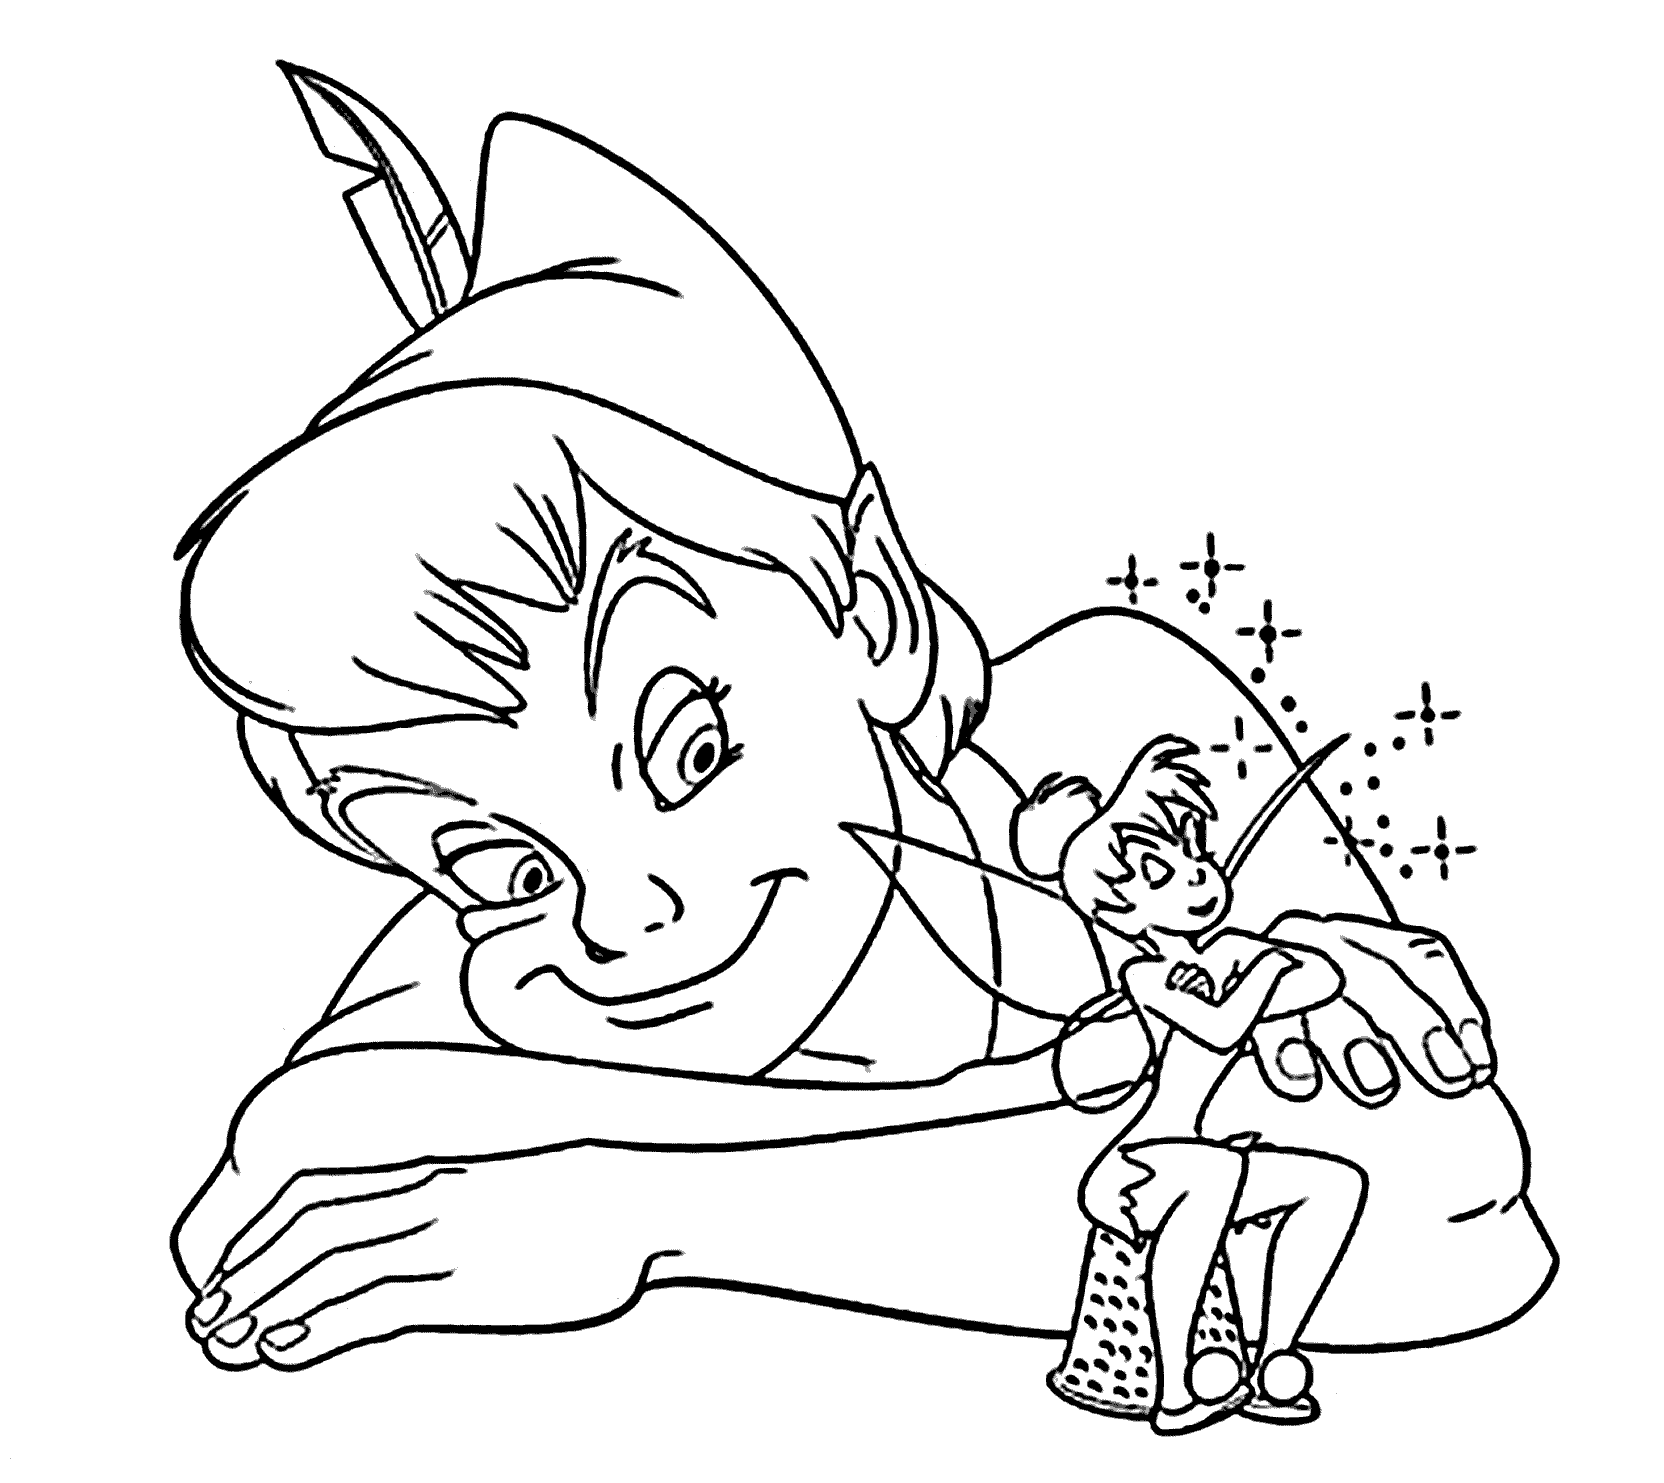 Disney Adult Coloring Pages Peter Pan Coloring Pages